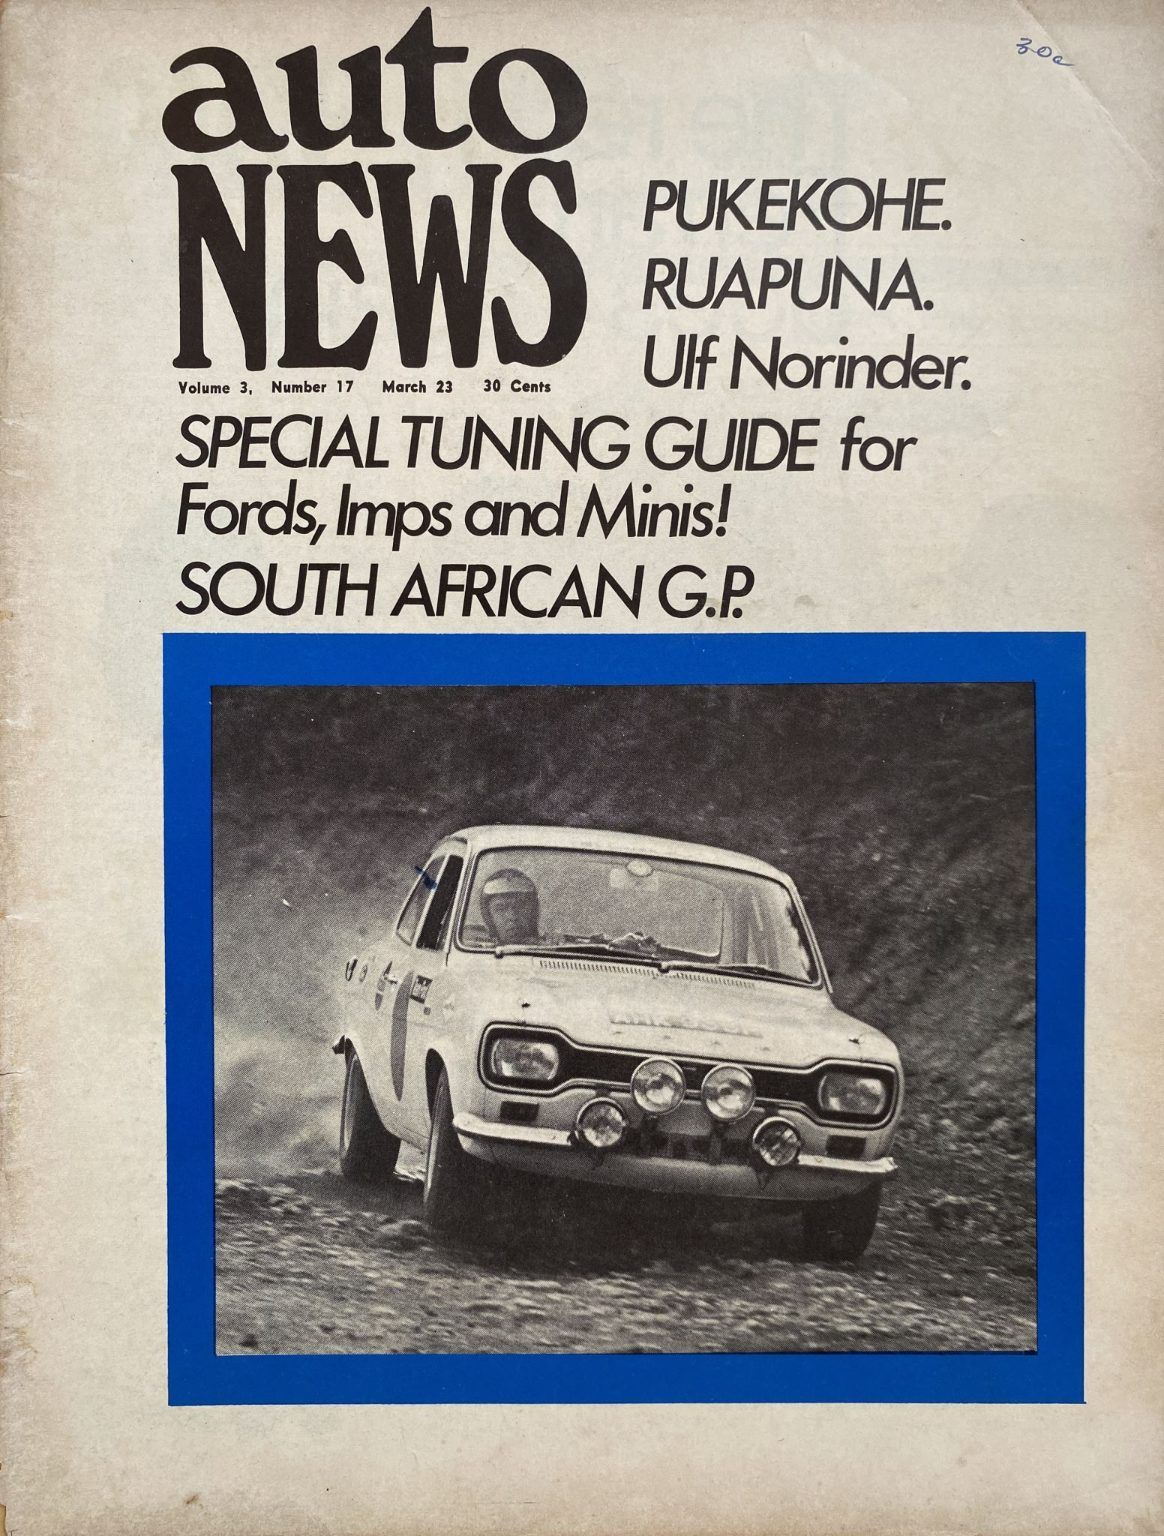 OLD MAGAZINE: Auto News - Vol. 3, Number 17, 23rd March 1970